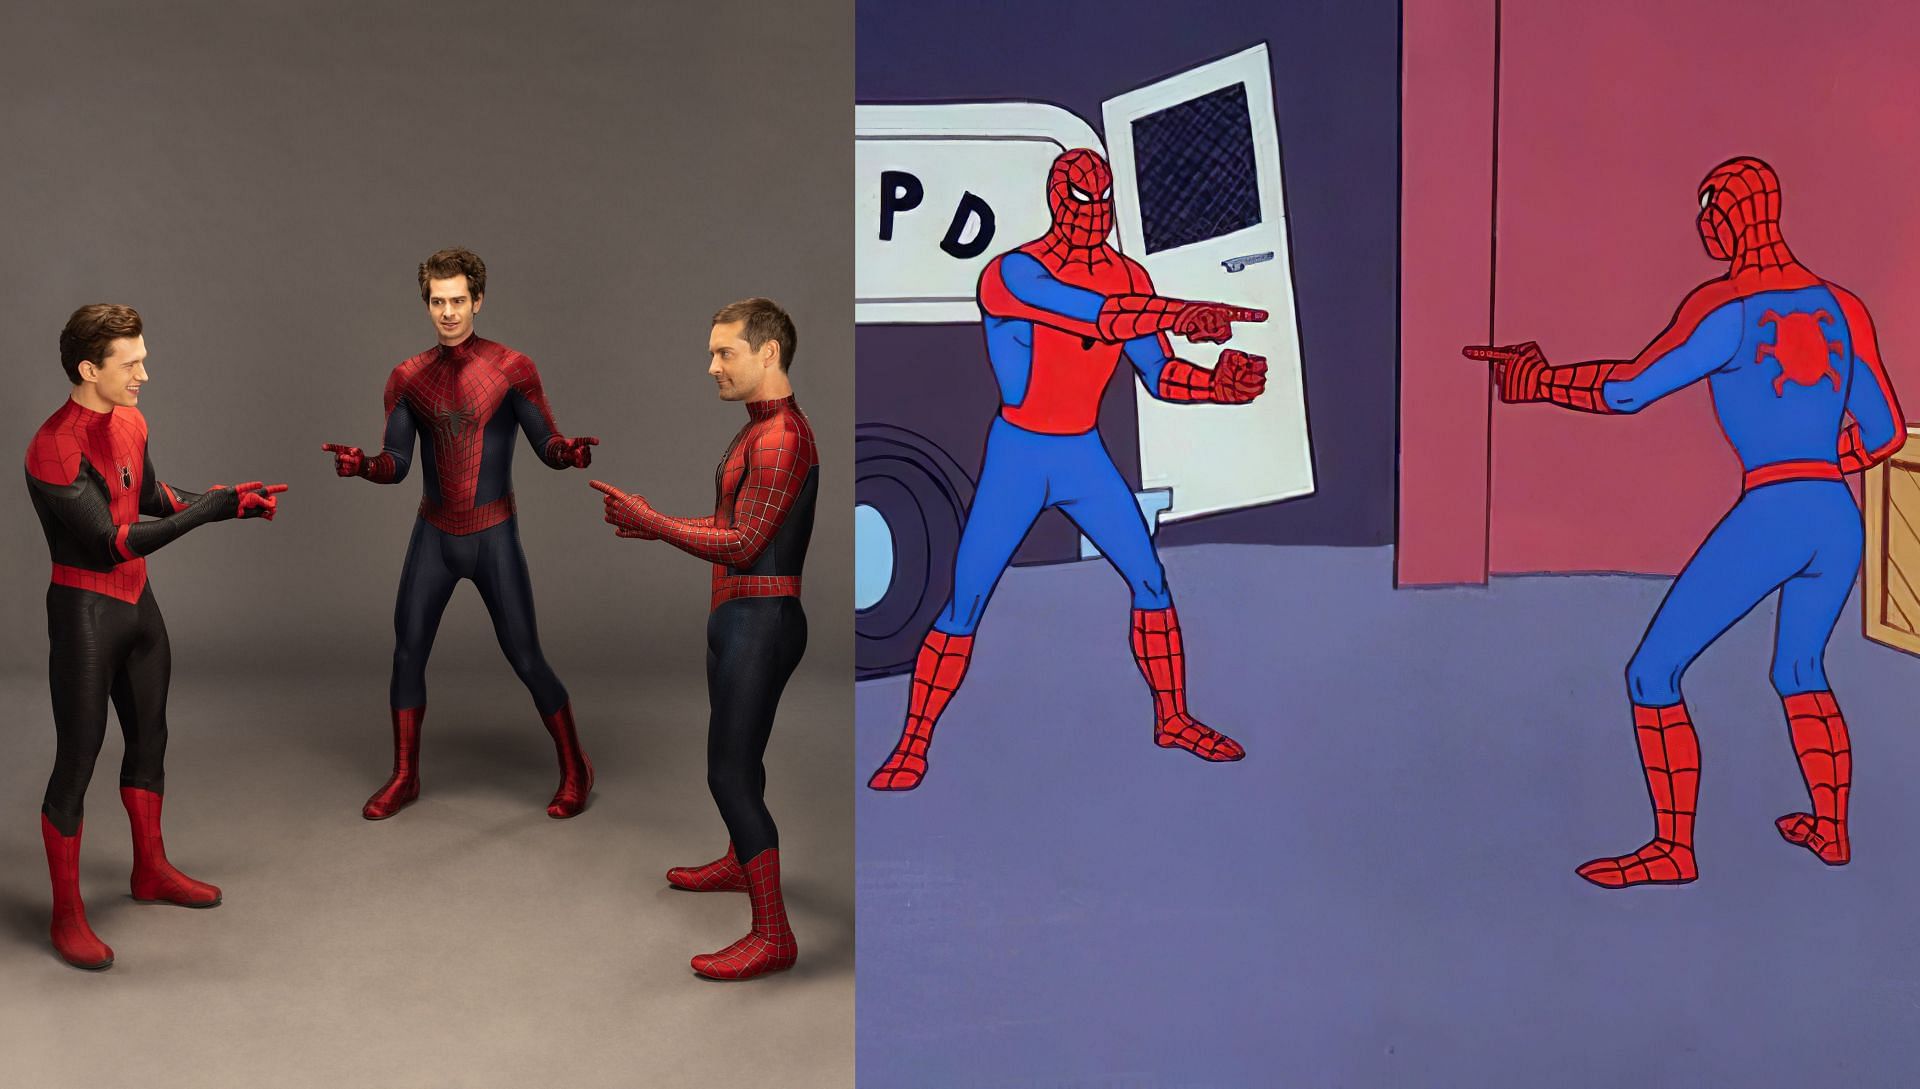 Iconic Spider Man Pointing Meme Exploring The History Of The Meme As